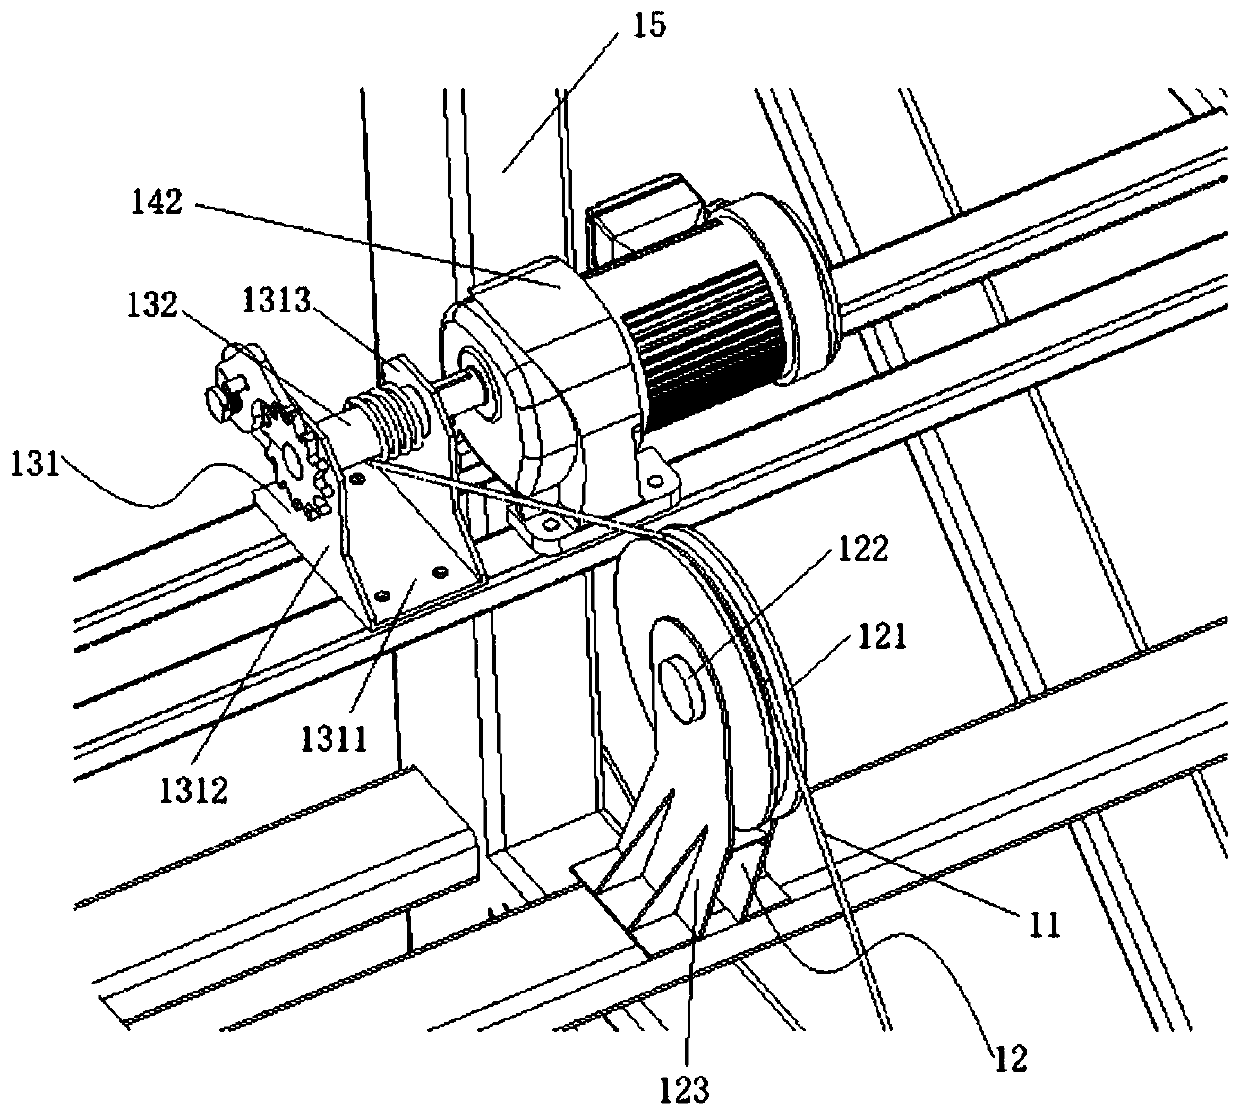 Fall-off hold-down system for carrier rocket and injection connector